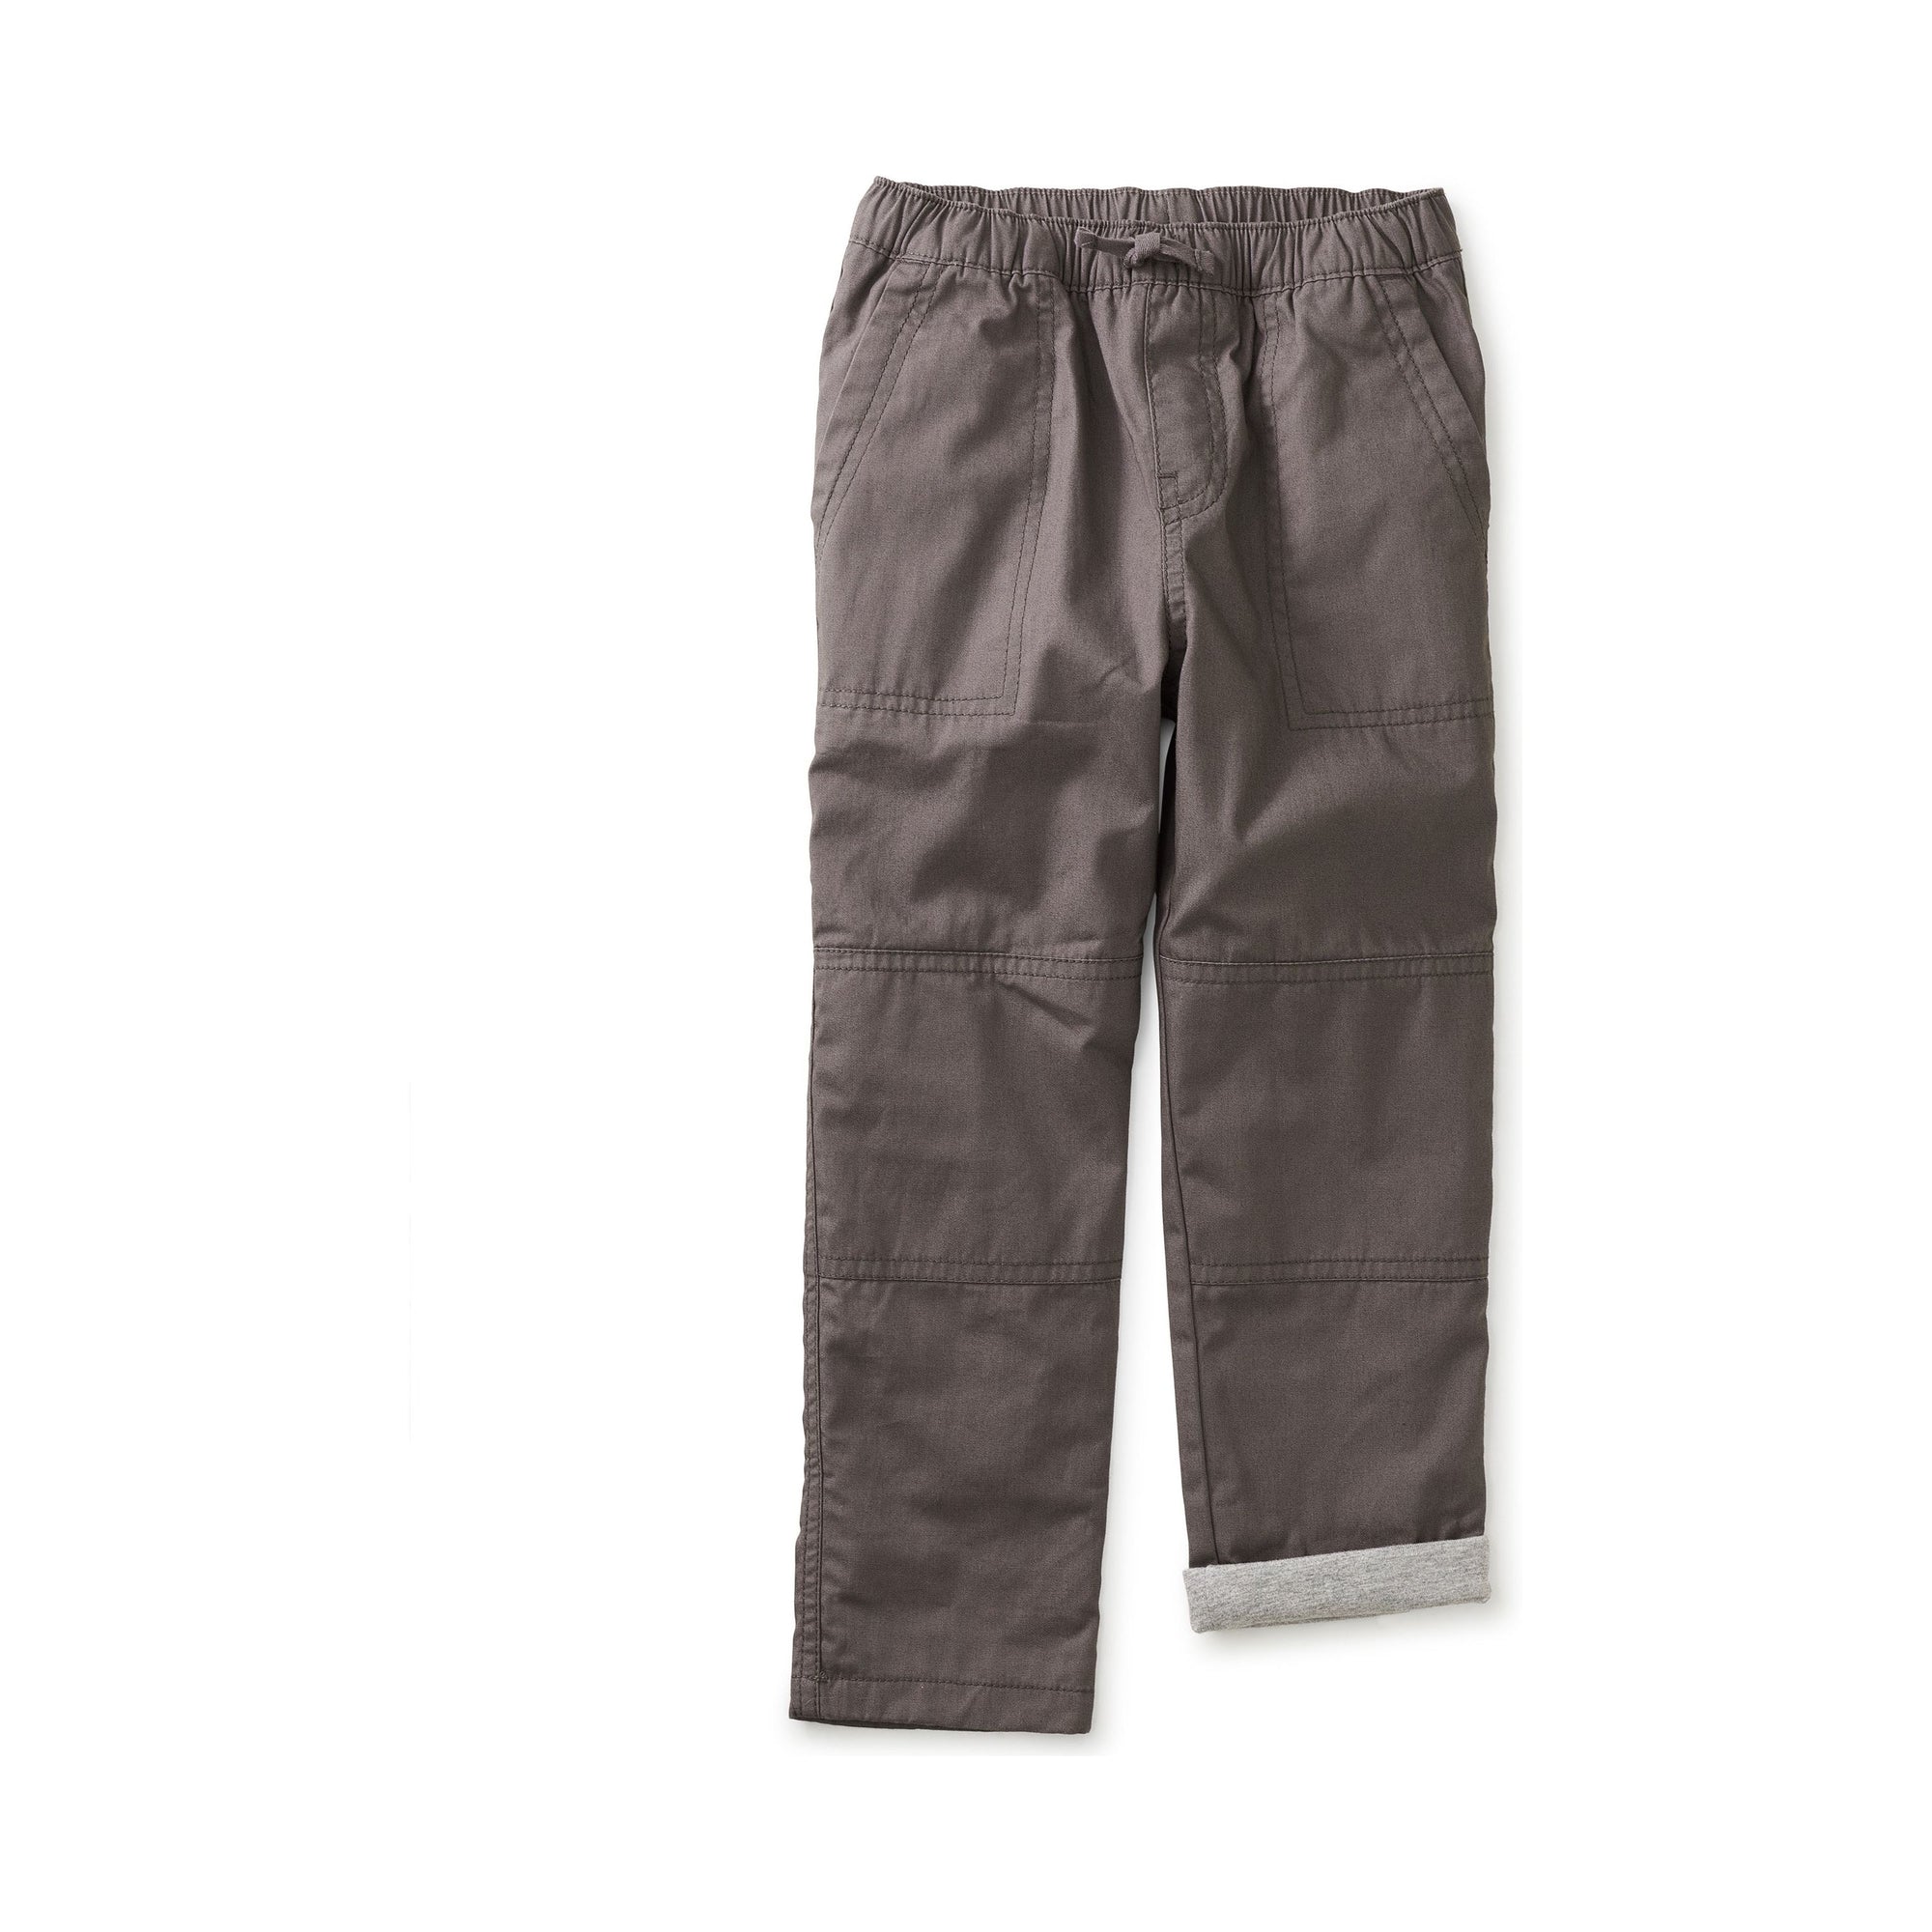 Cozy Does It Lined Pants - Slate